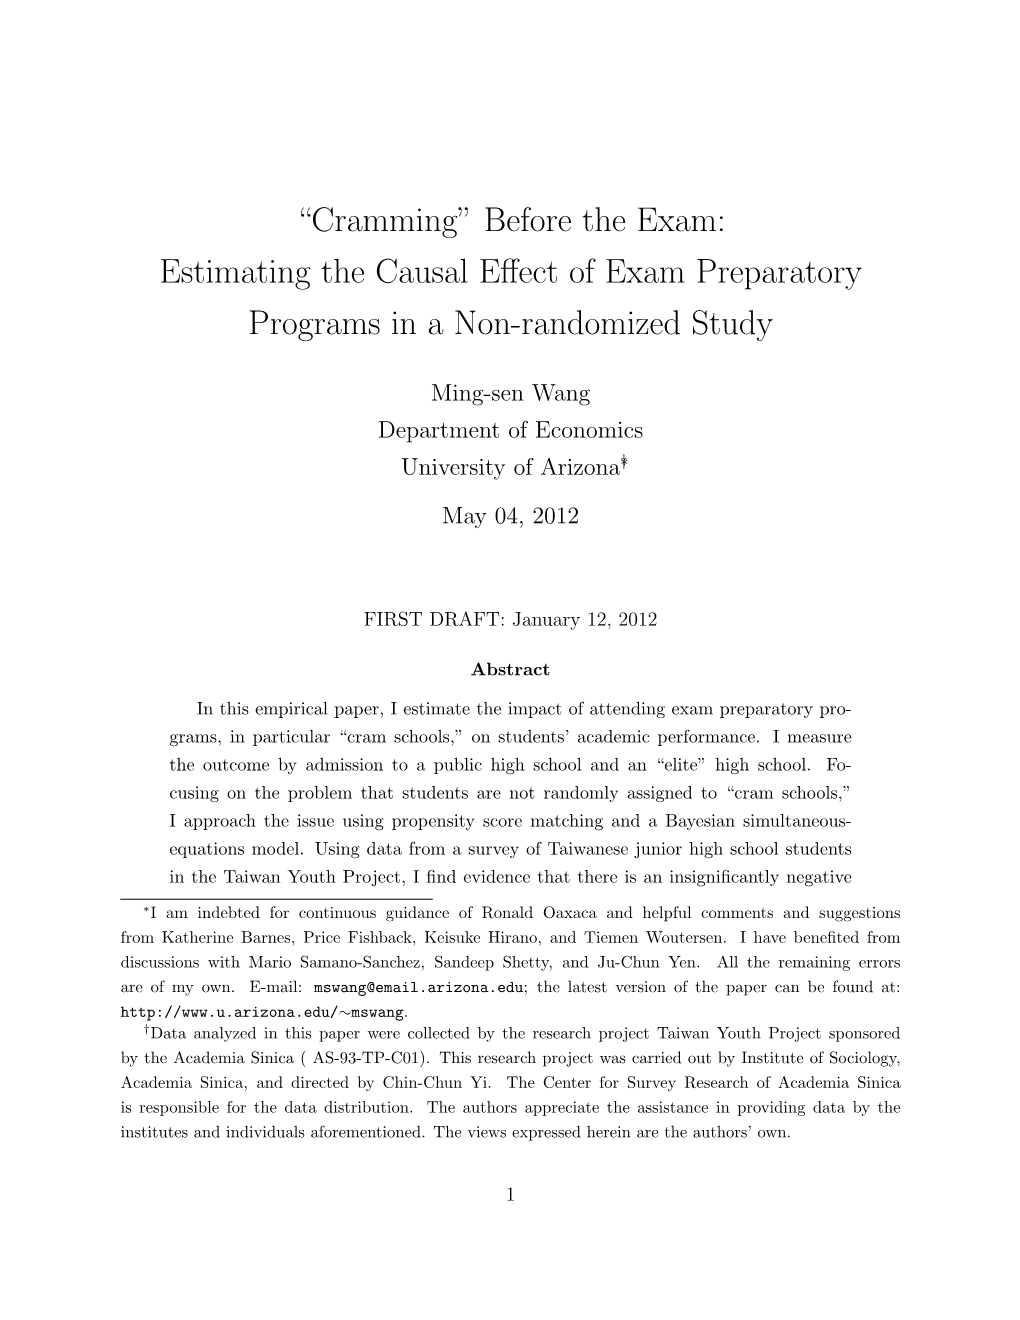 “Cramming” Before the Exam: Estimating the Causal Effect Of